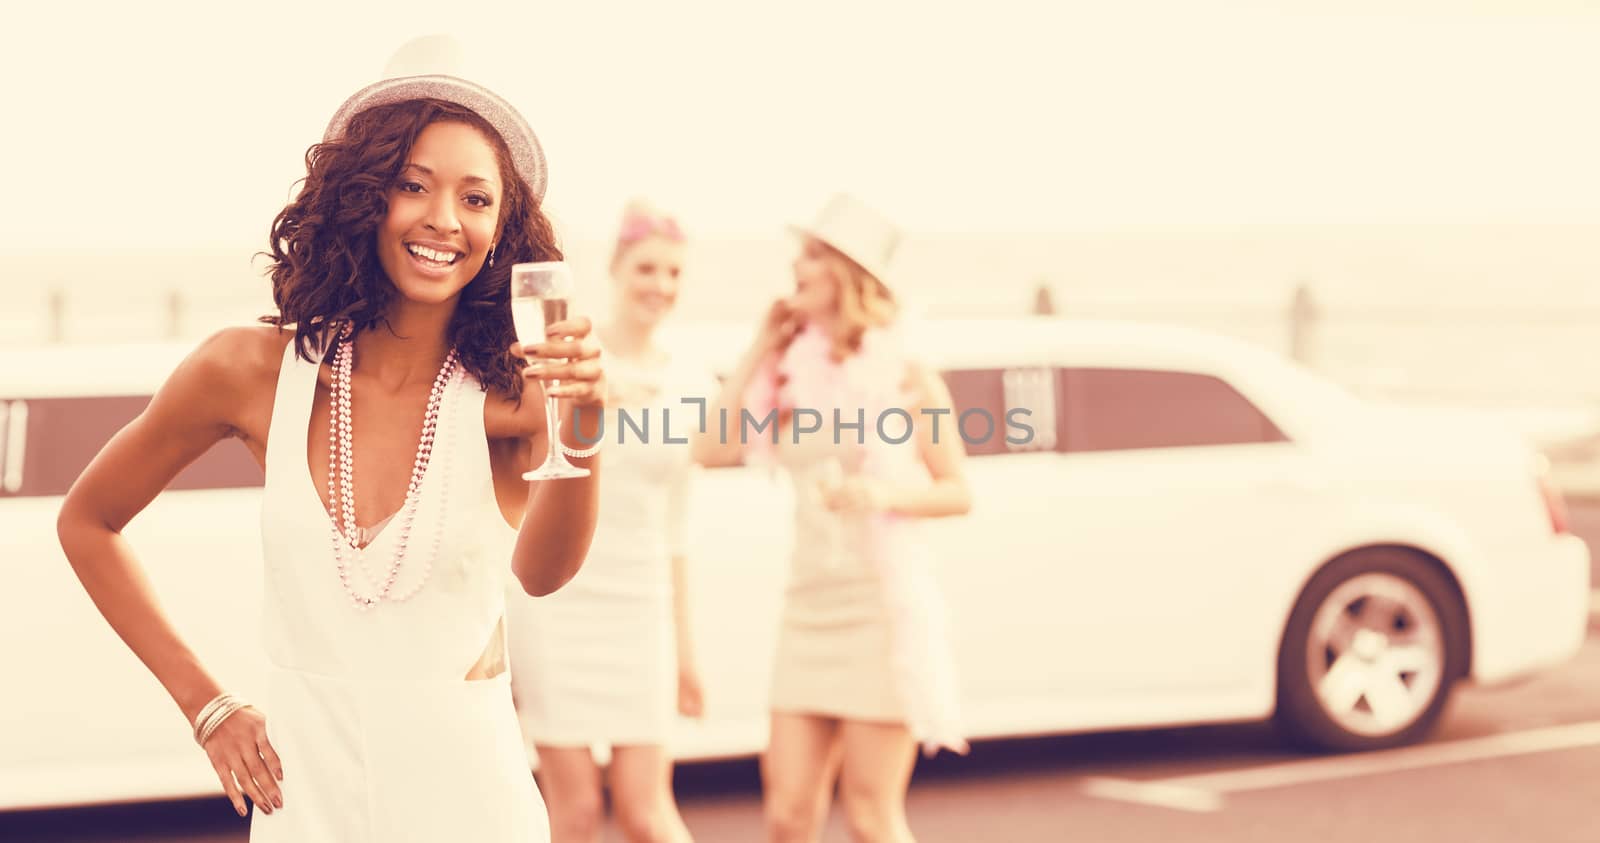 Portrait of women holding champagne while standing next to limousine at outdoors